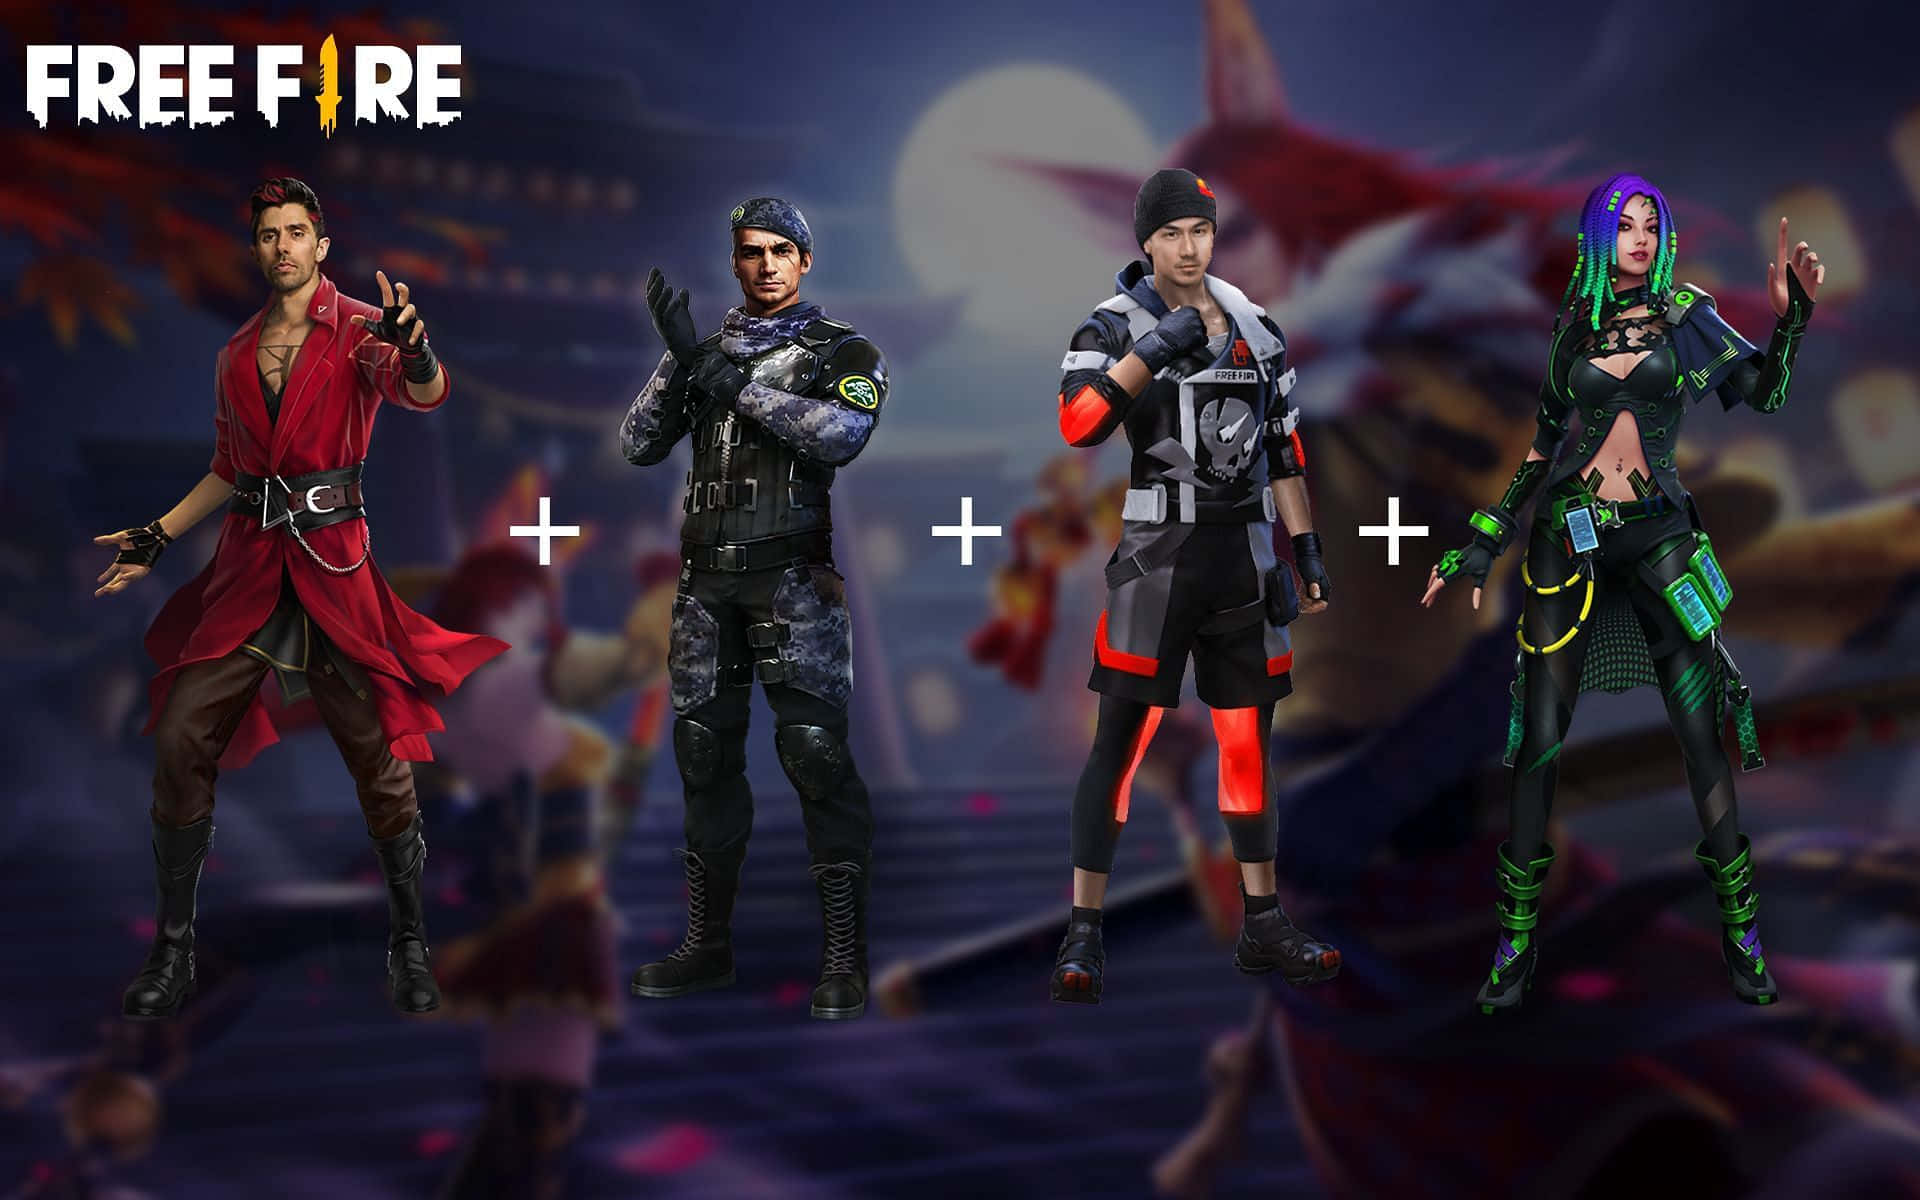 Free Fire - A Group Of Characters In Costumes